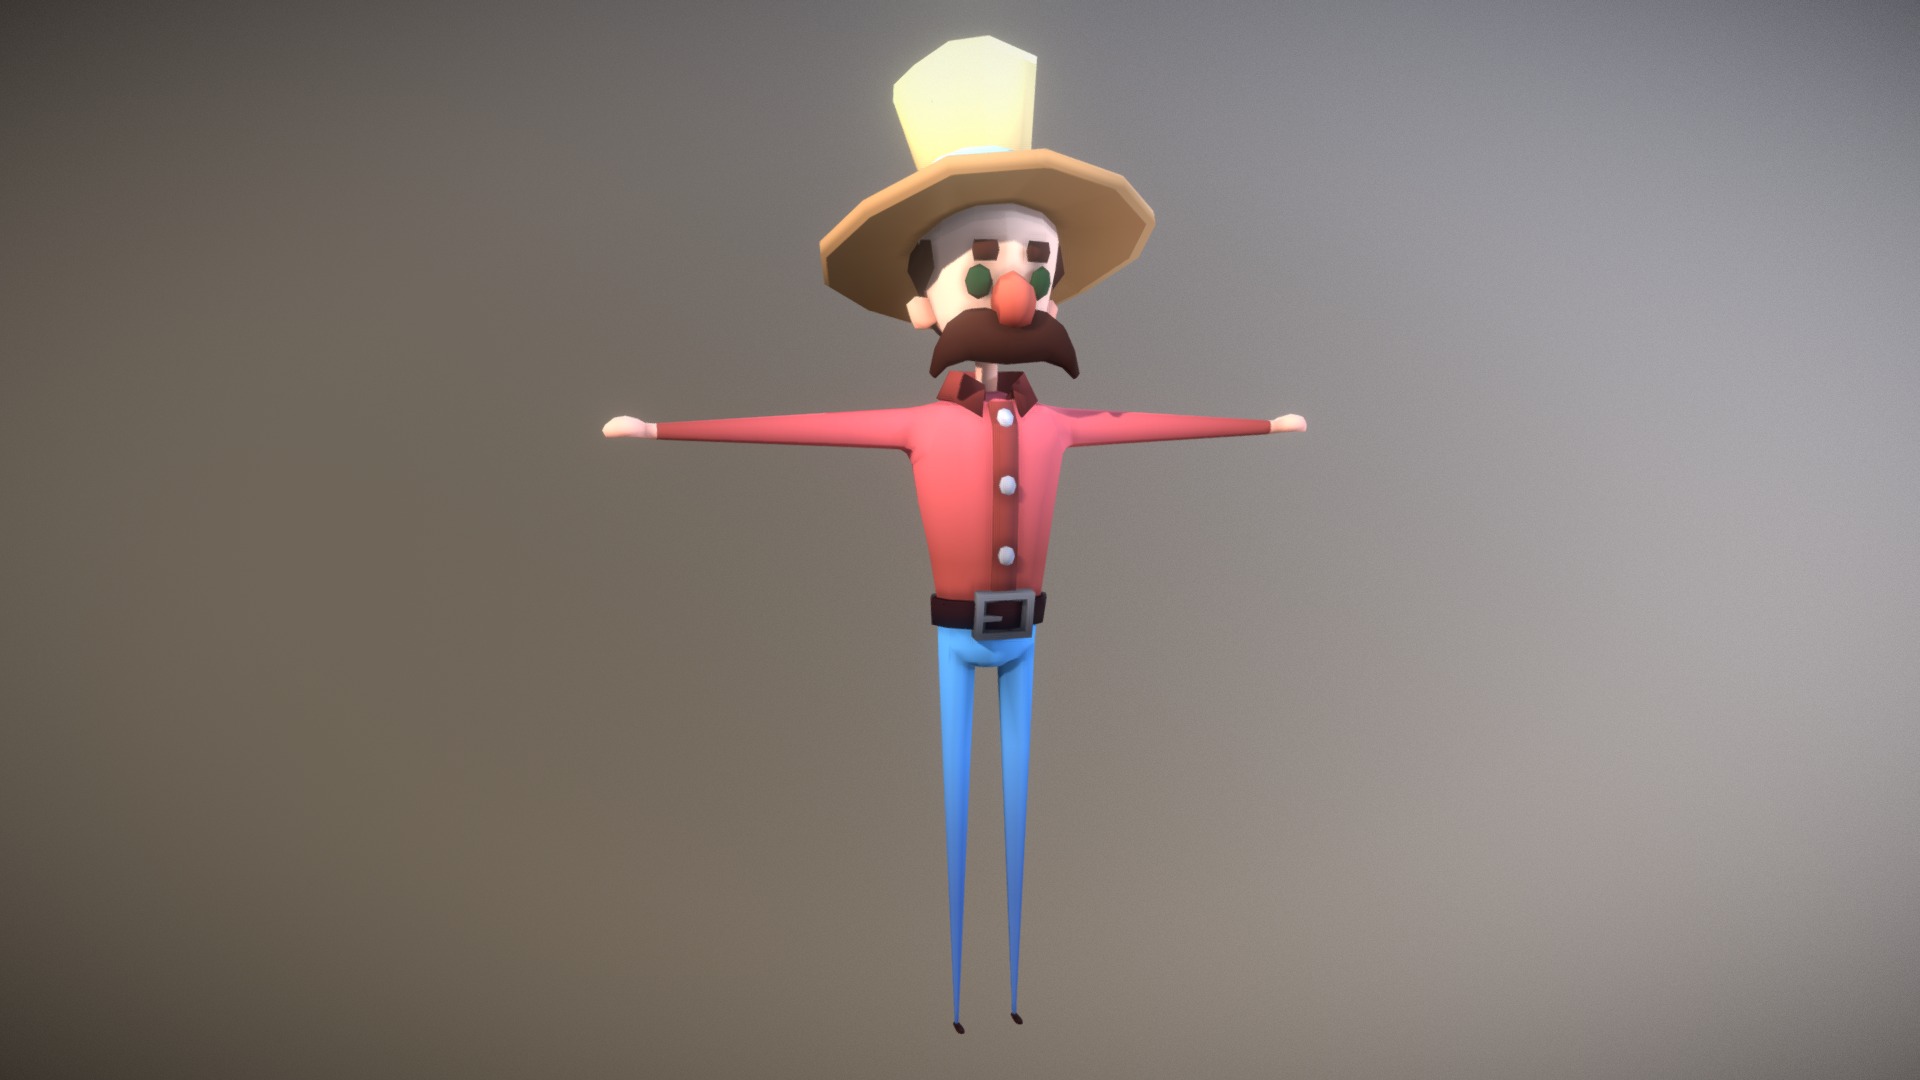 3D model Farmer - This is a 3D model of the Farmer. The 3D model is about a toy figure with a light bulb on top of it.